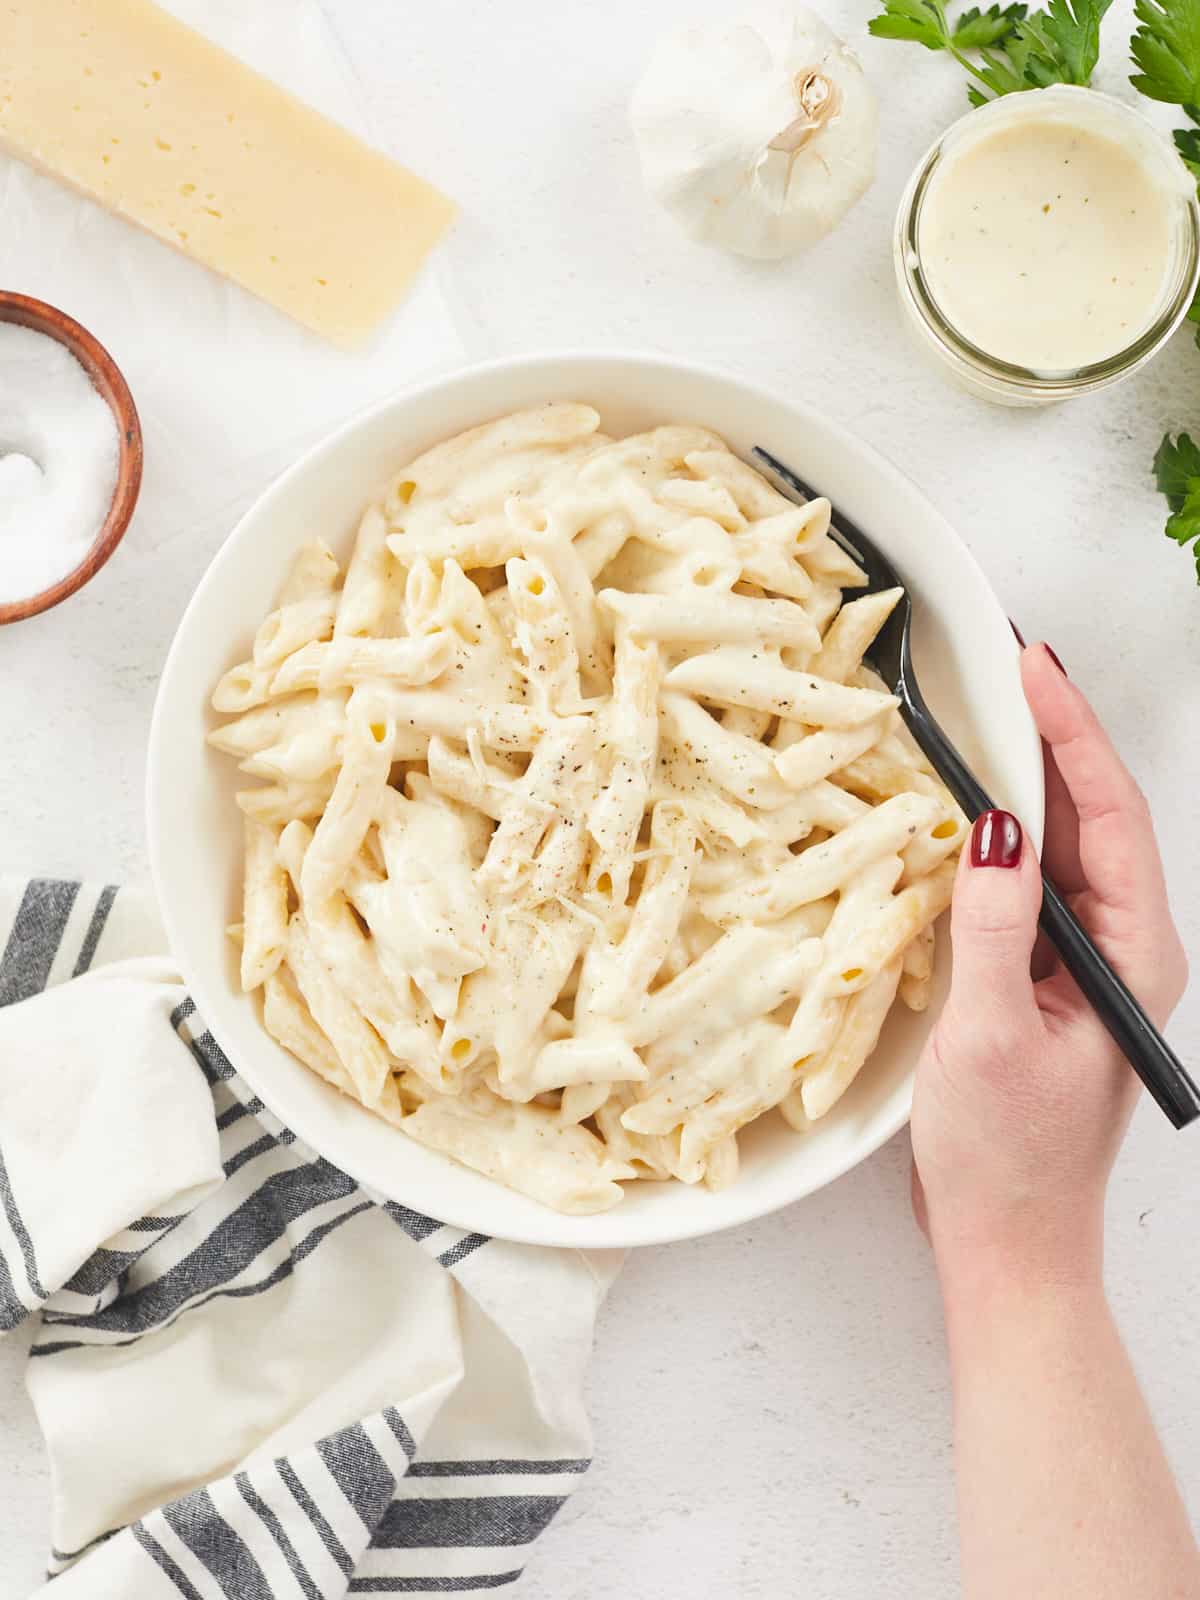 A large white bowl filled with cooked penne pasta dressed with homemade alfredo sauce, a hand is holding the right side of the bowl and a black metal fork, various props surround the bowl including a grey striped dish cloth, a block of parmesan cheese, a wooden bowl of salt and a mason jar of alfredo sauce.